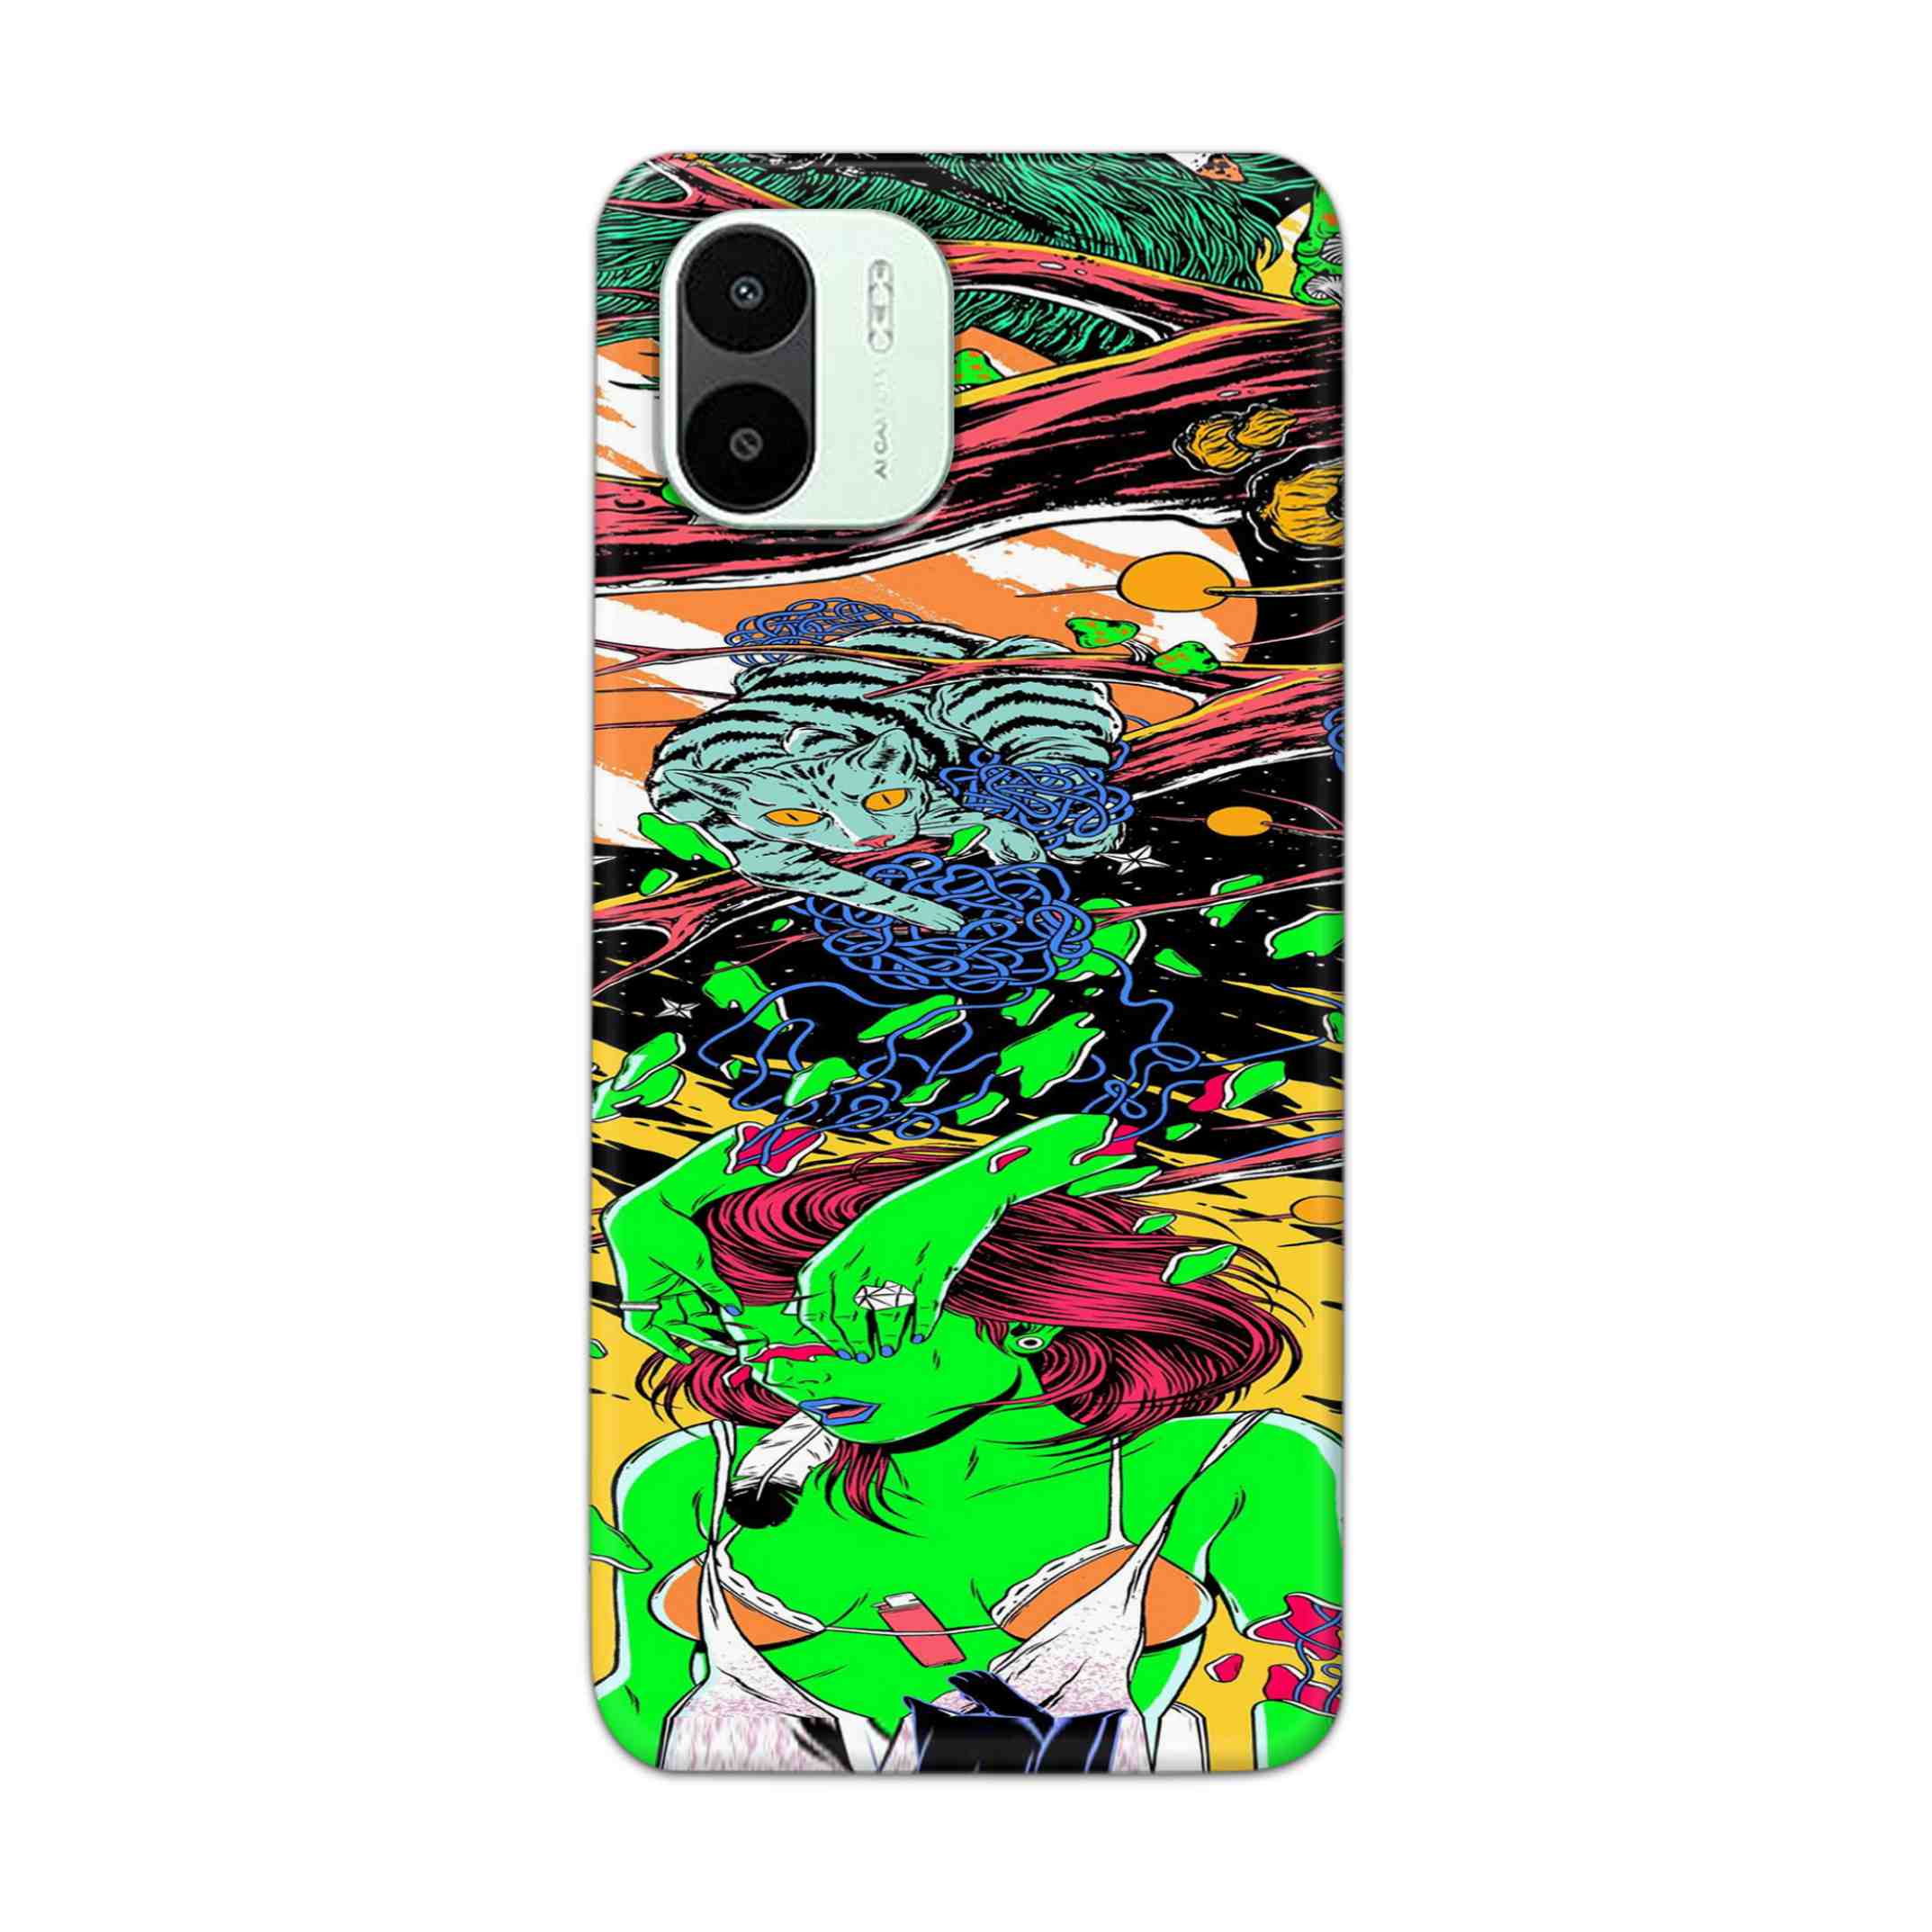 Buy Green Girl Art Hard Back Mobile Phone Case Cover For Xiaomi Redmi A1 5G Online